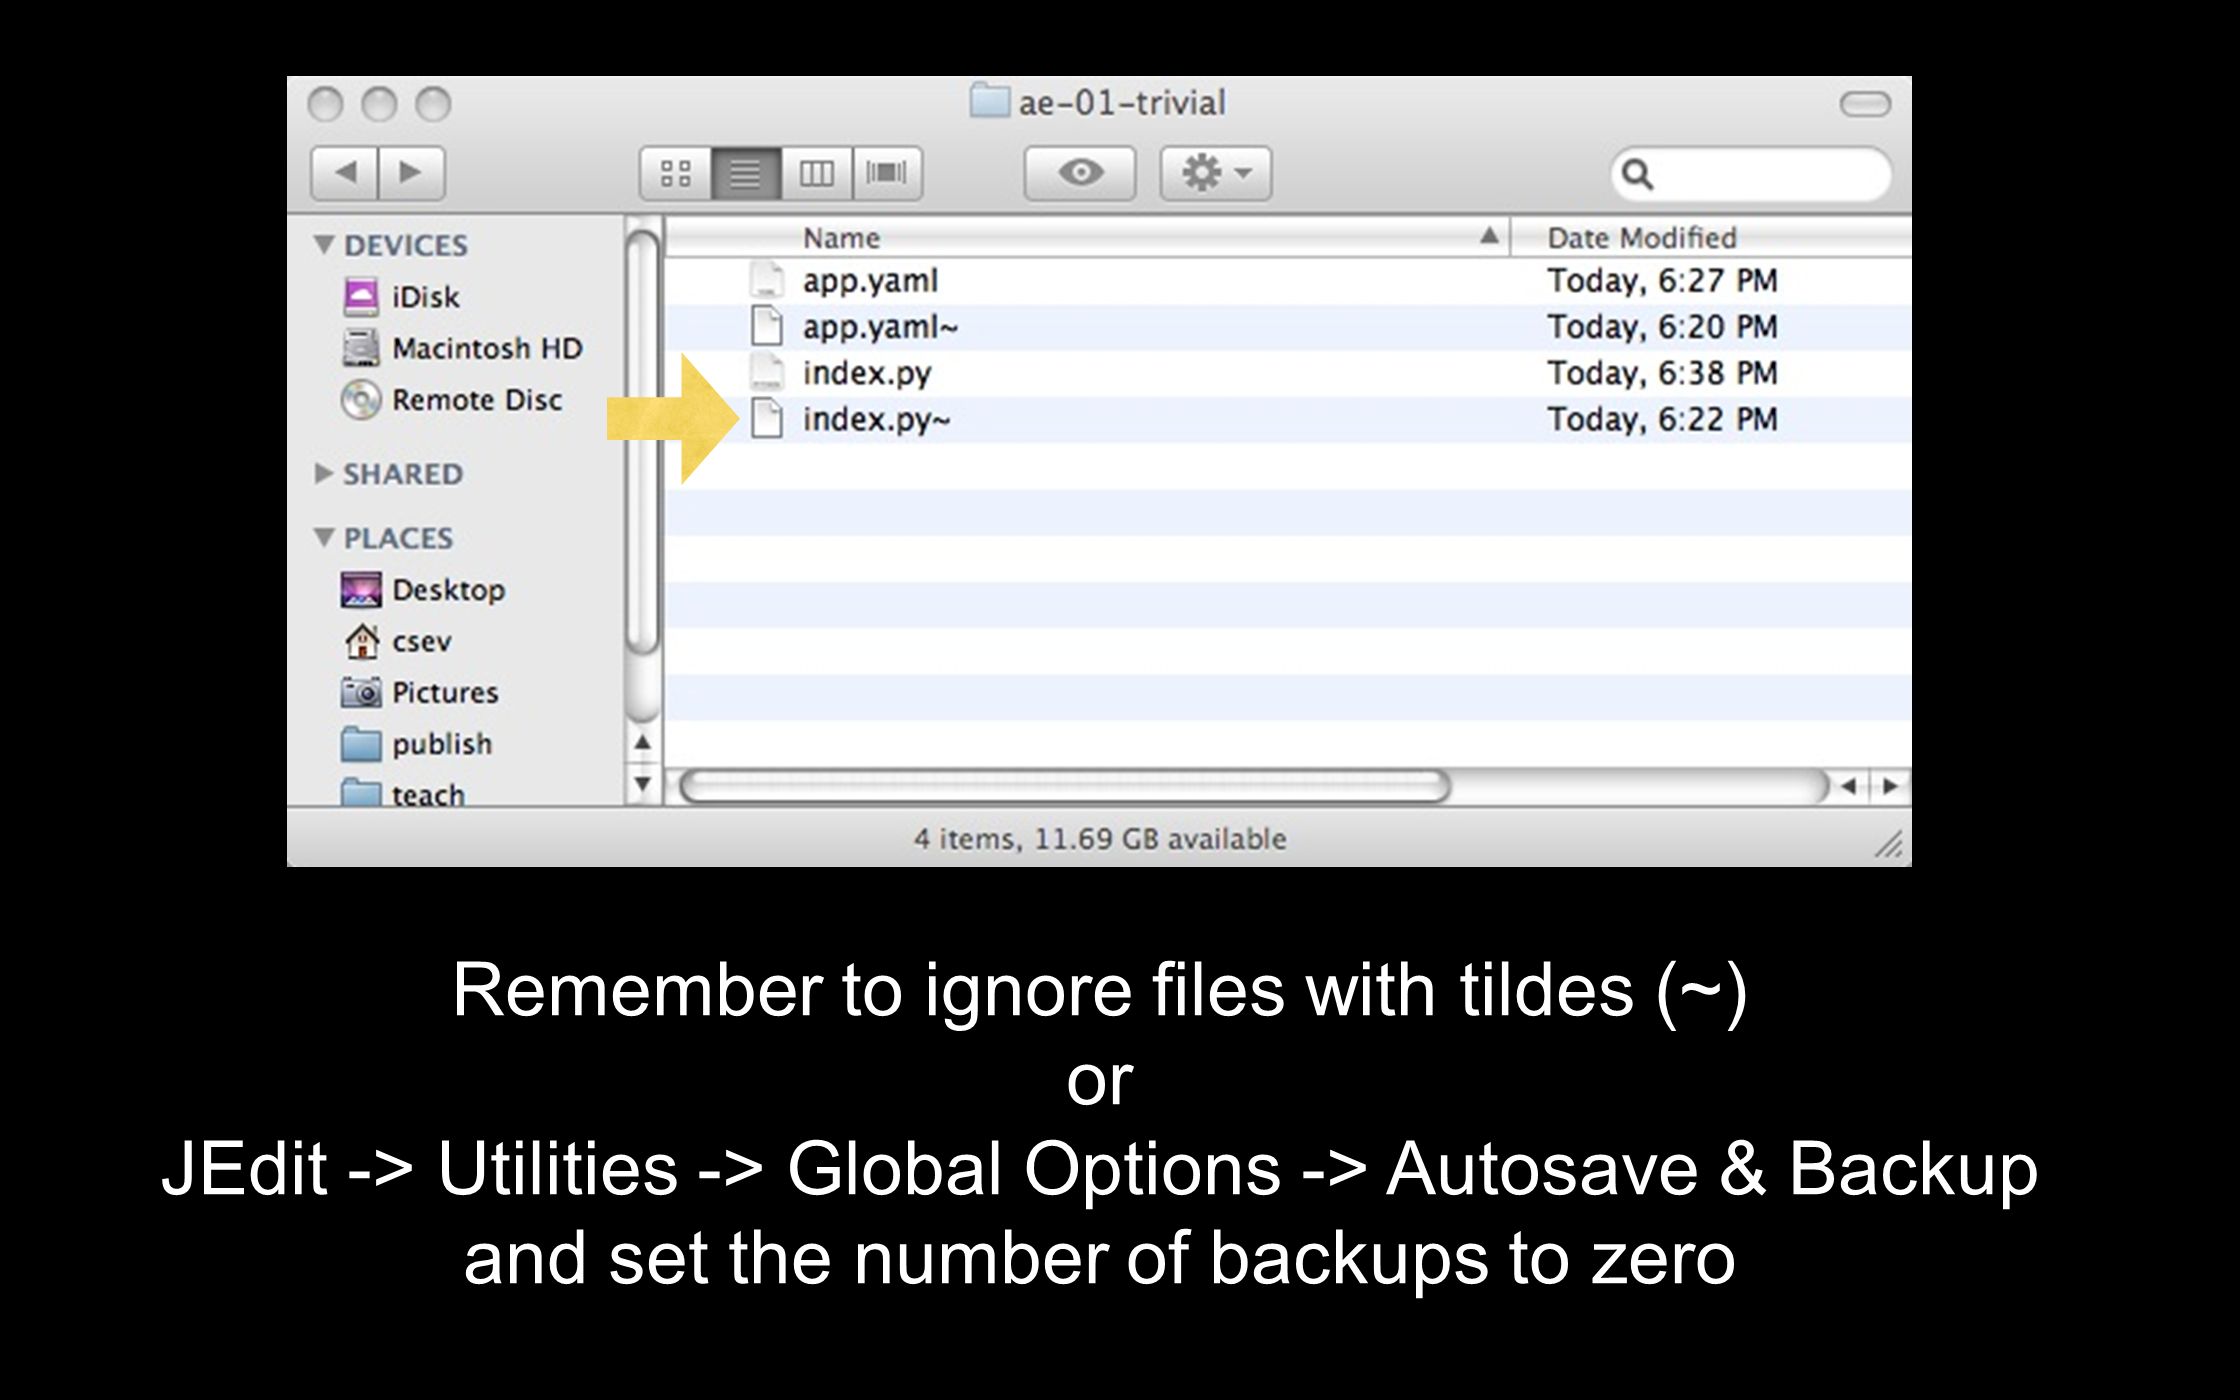 Remember to ignore files with tildes (~) or JEdit -> Utilities -> Global Options -> Autosave & Backup and set the number of backups to zero